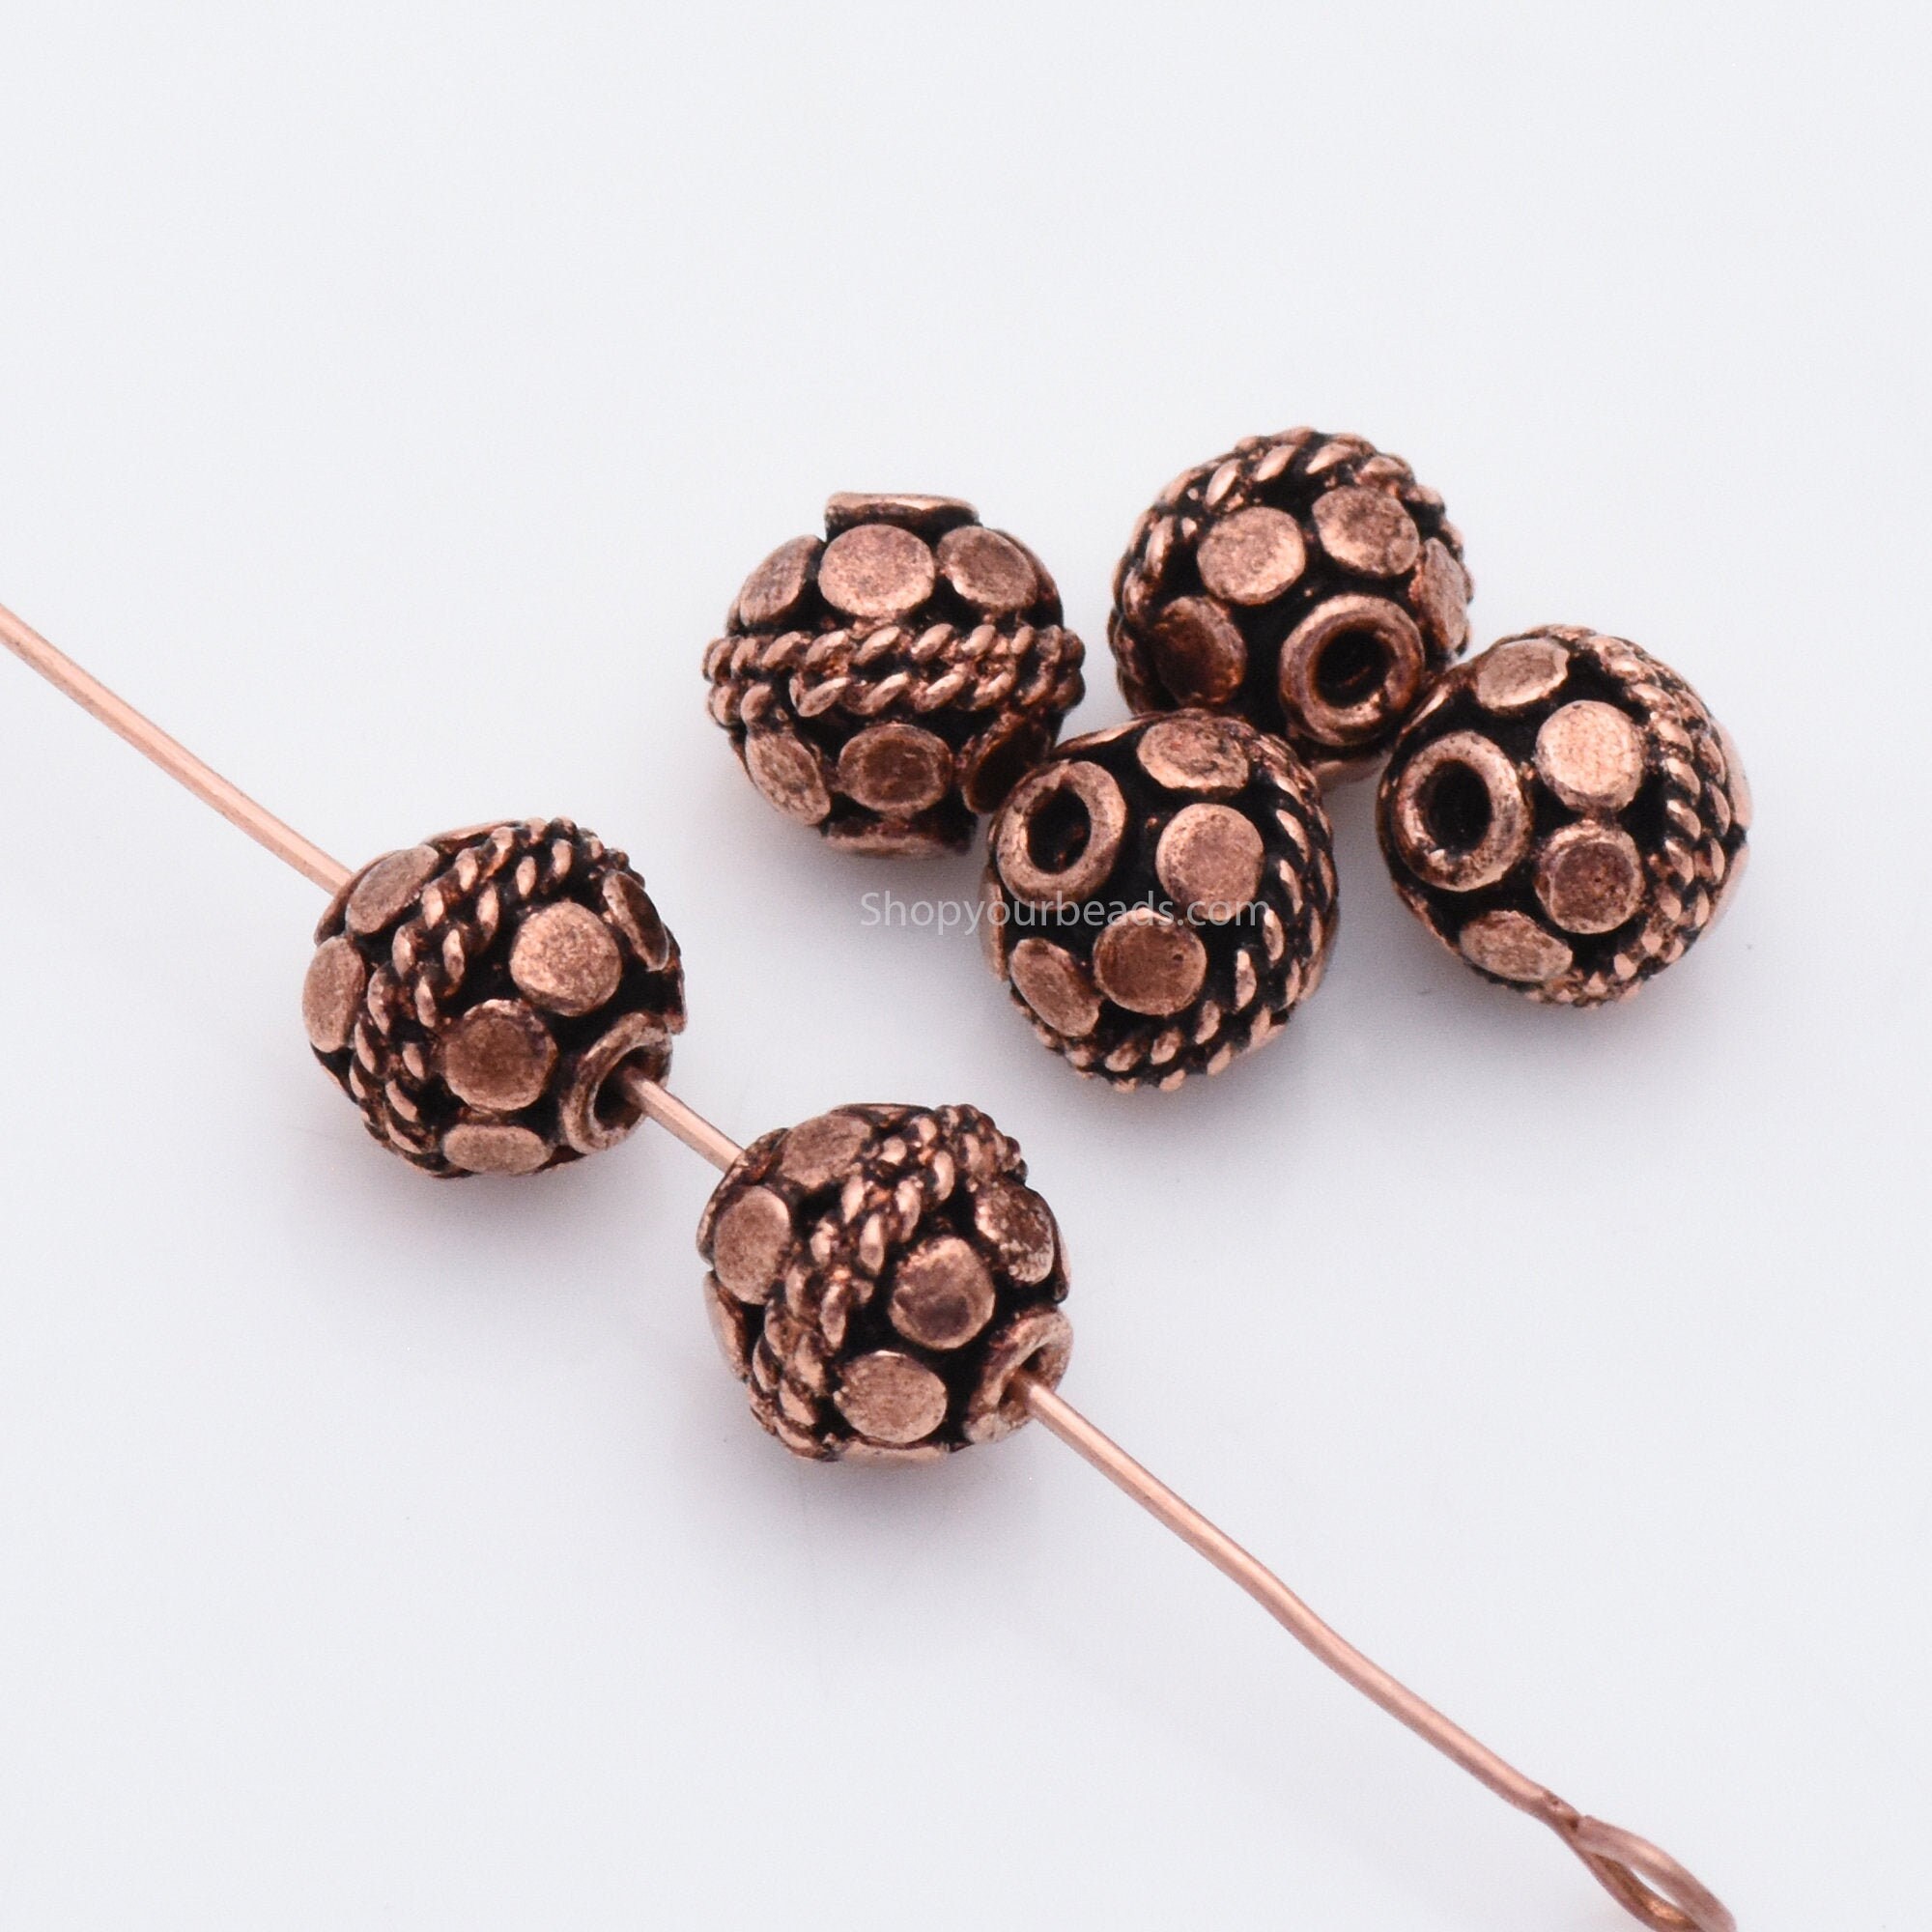 8mm - 5pc Dark antique Copper beads for jewelry making, square shape, Bali  style copper spacer beads